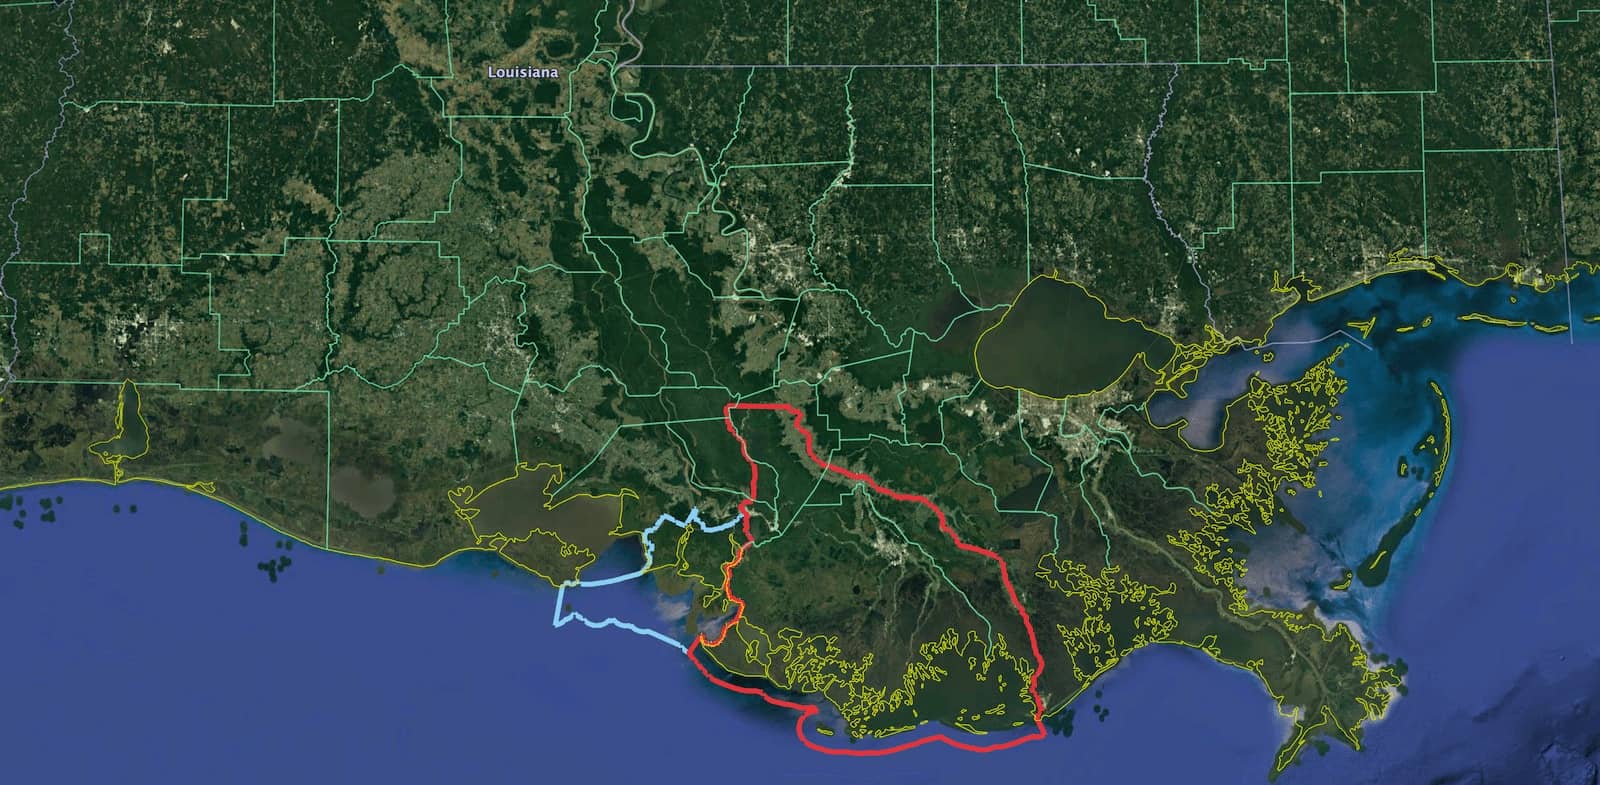 Google Earth image of the Gulf Coast with a blue outline around the Atchafalaya Basin to the west and a red outline around the Terrebonne Basin to the east